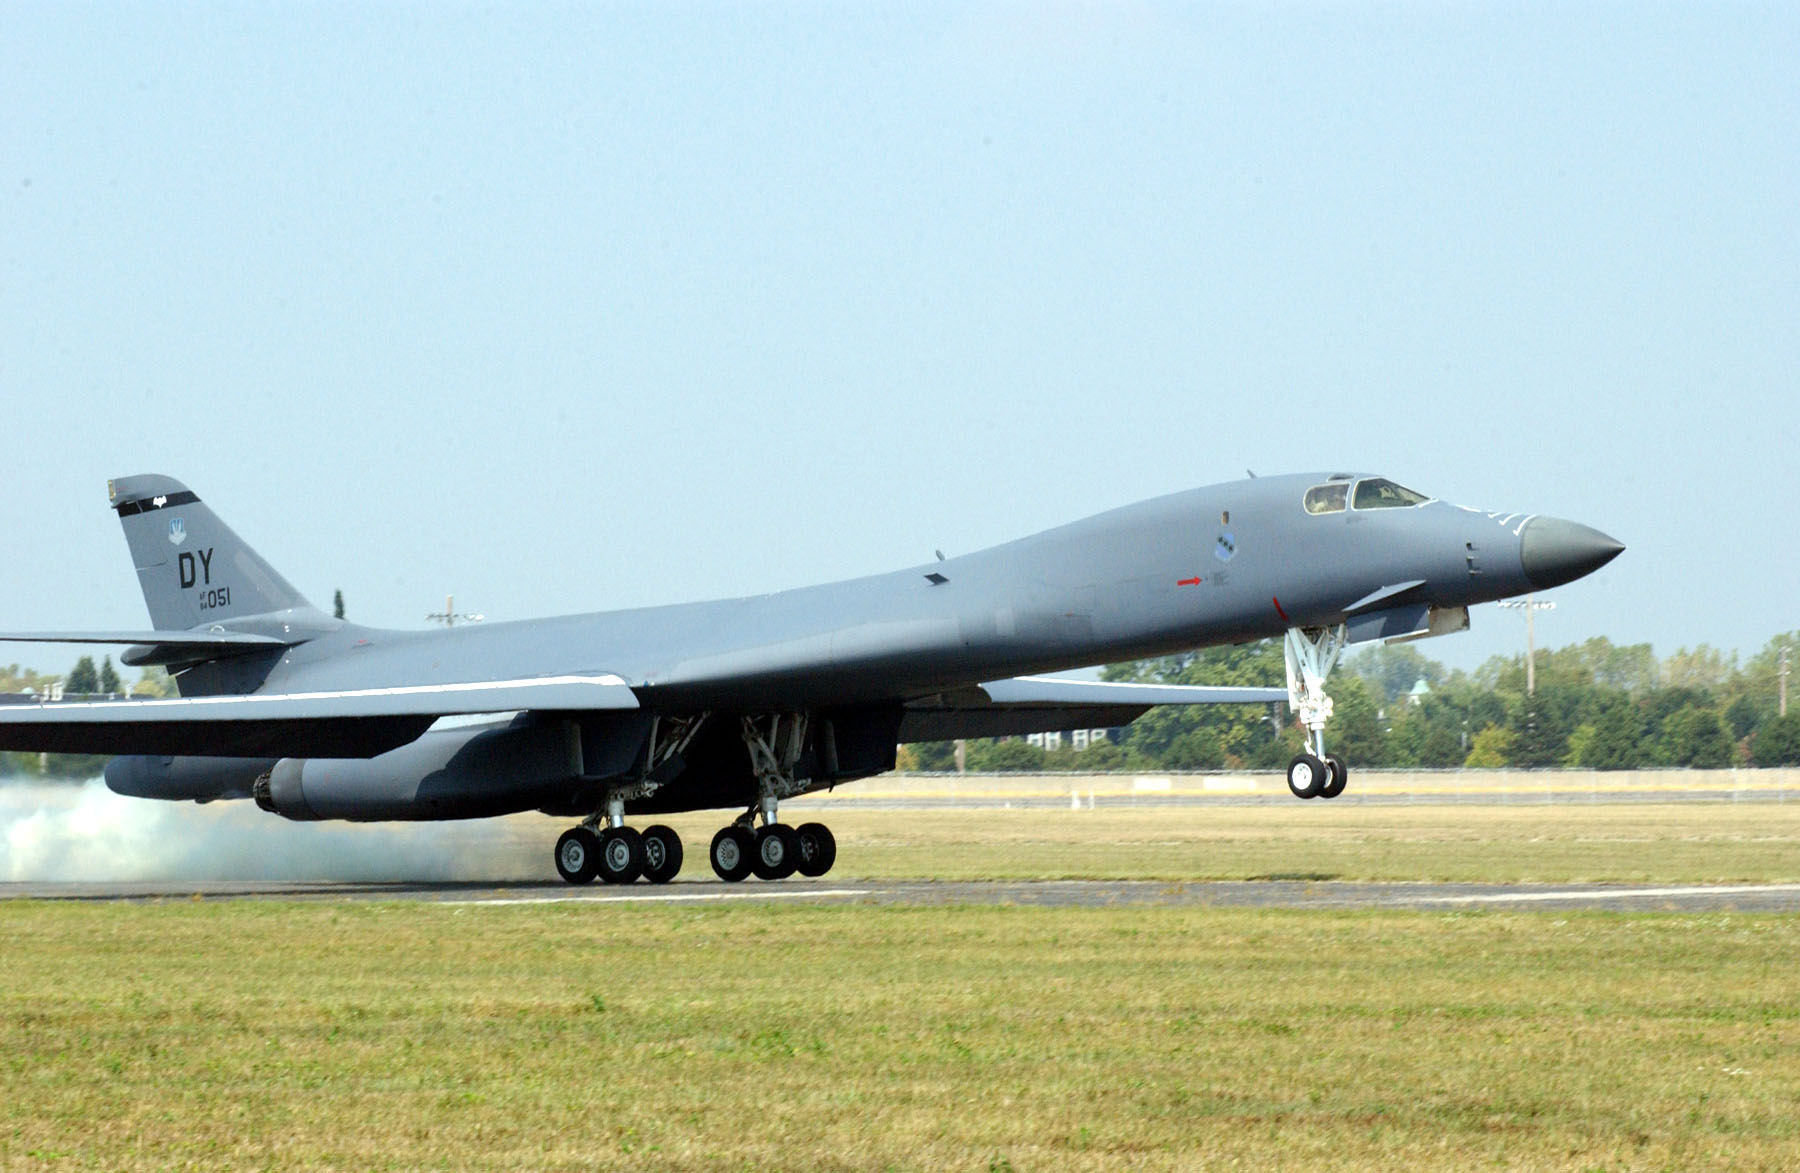 The Boeing (formerly Rockwell International) B-1B Lancer is the improved variant of the B-1A, which was cancelled in 1977. Initiated in 1981, the first production model of this long-range, multi-role, heavy bomber flew in October 1984. The first operational B-1B was delivered to Dyess Air Force Base, Texas, in June 1985, and the final B-1B was delivered in 1988. US Air Force photo. -